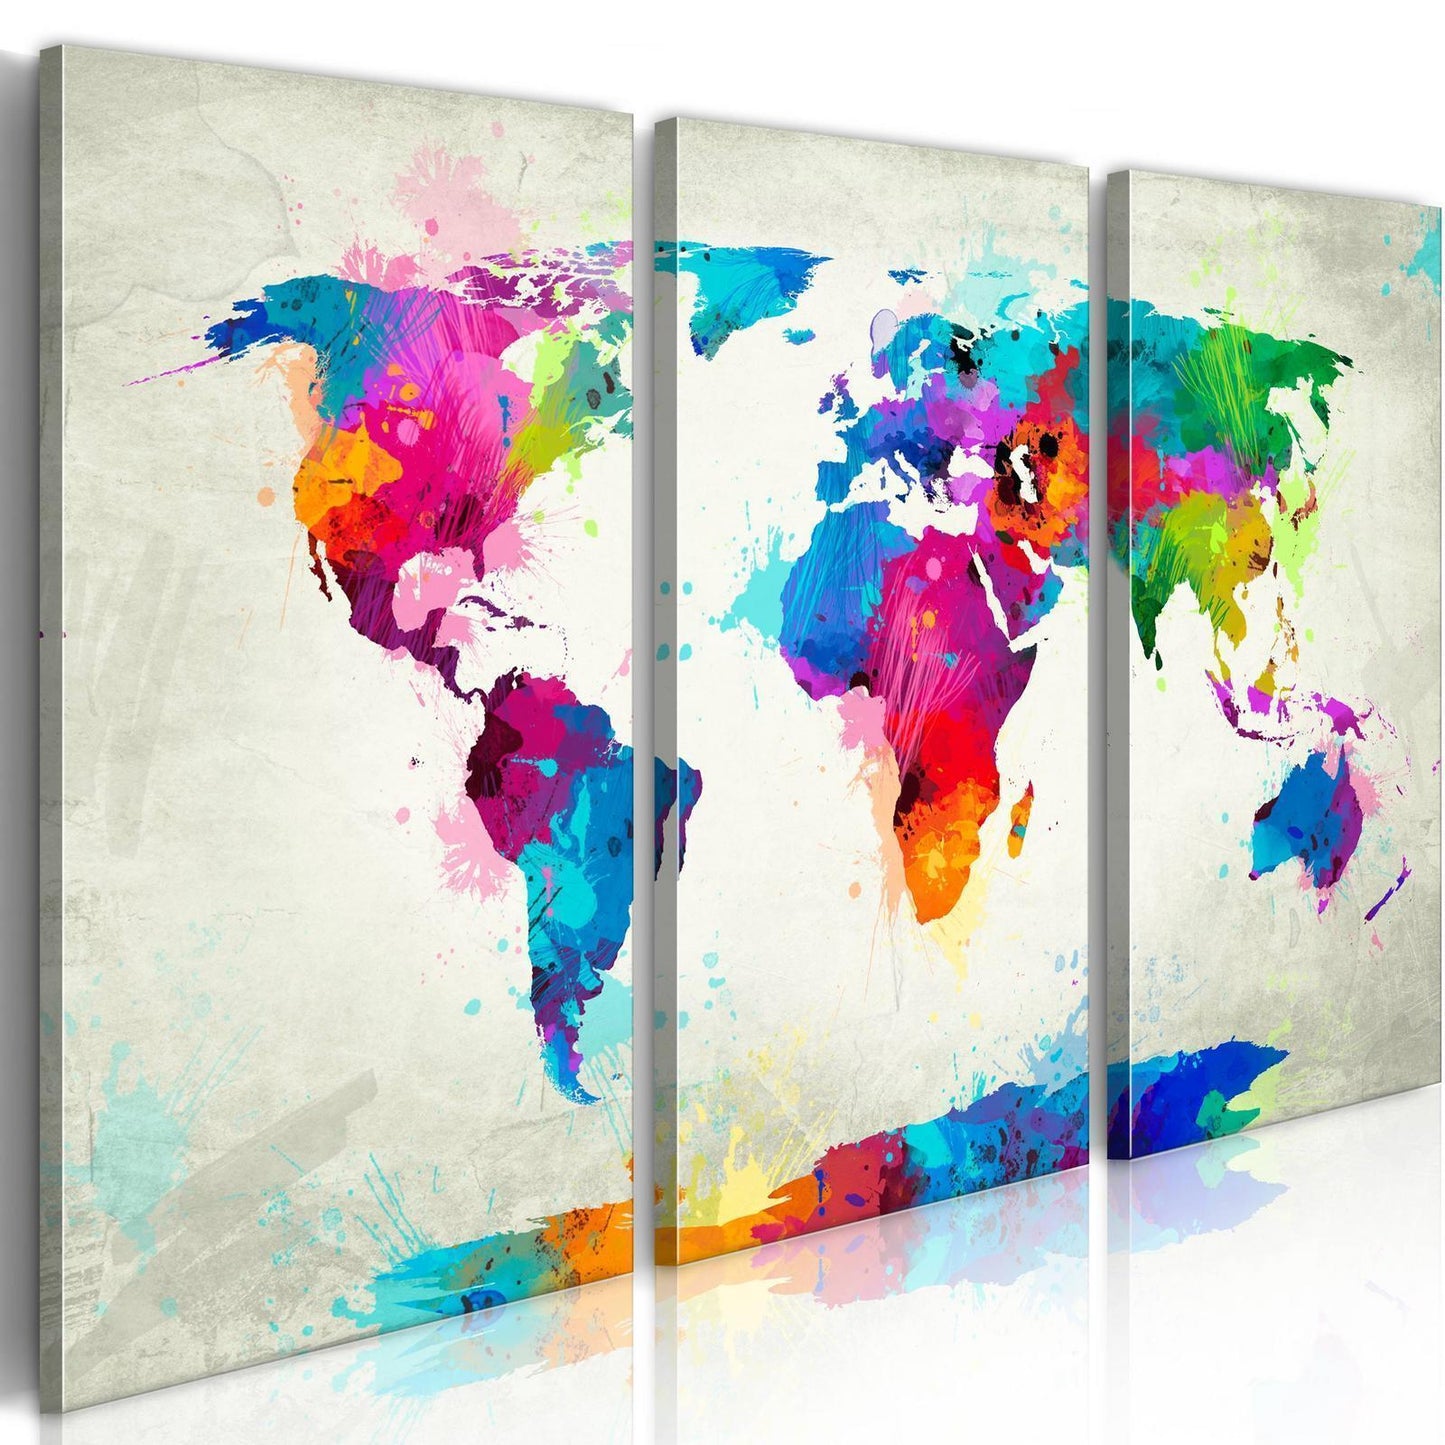 Afbeelding op acrylglas - World Map: An Explosion of Colours